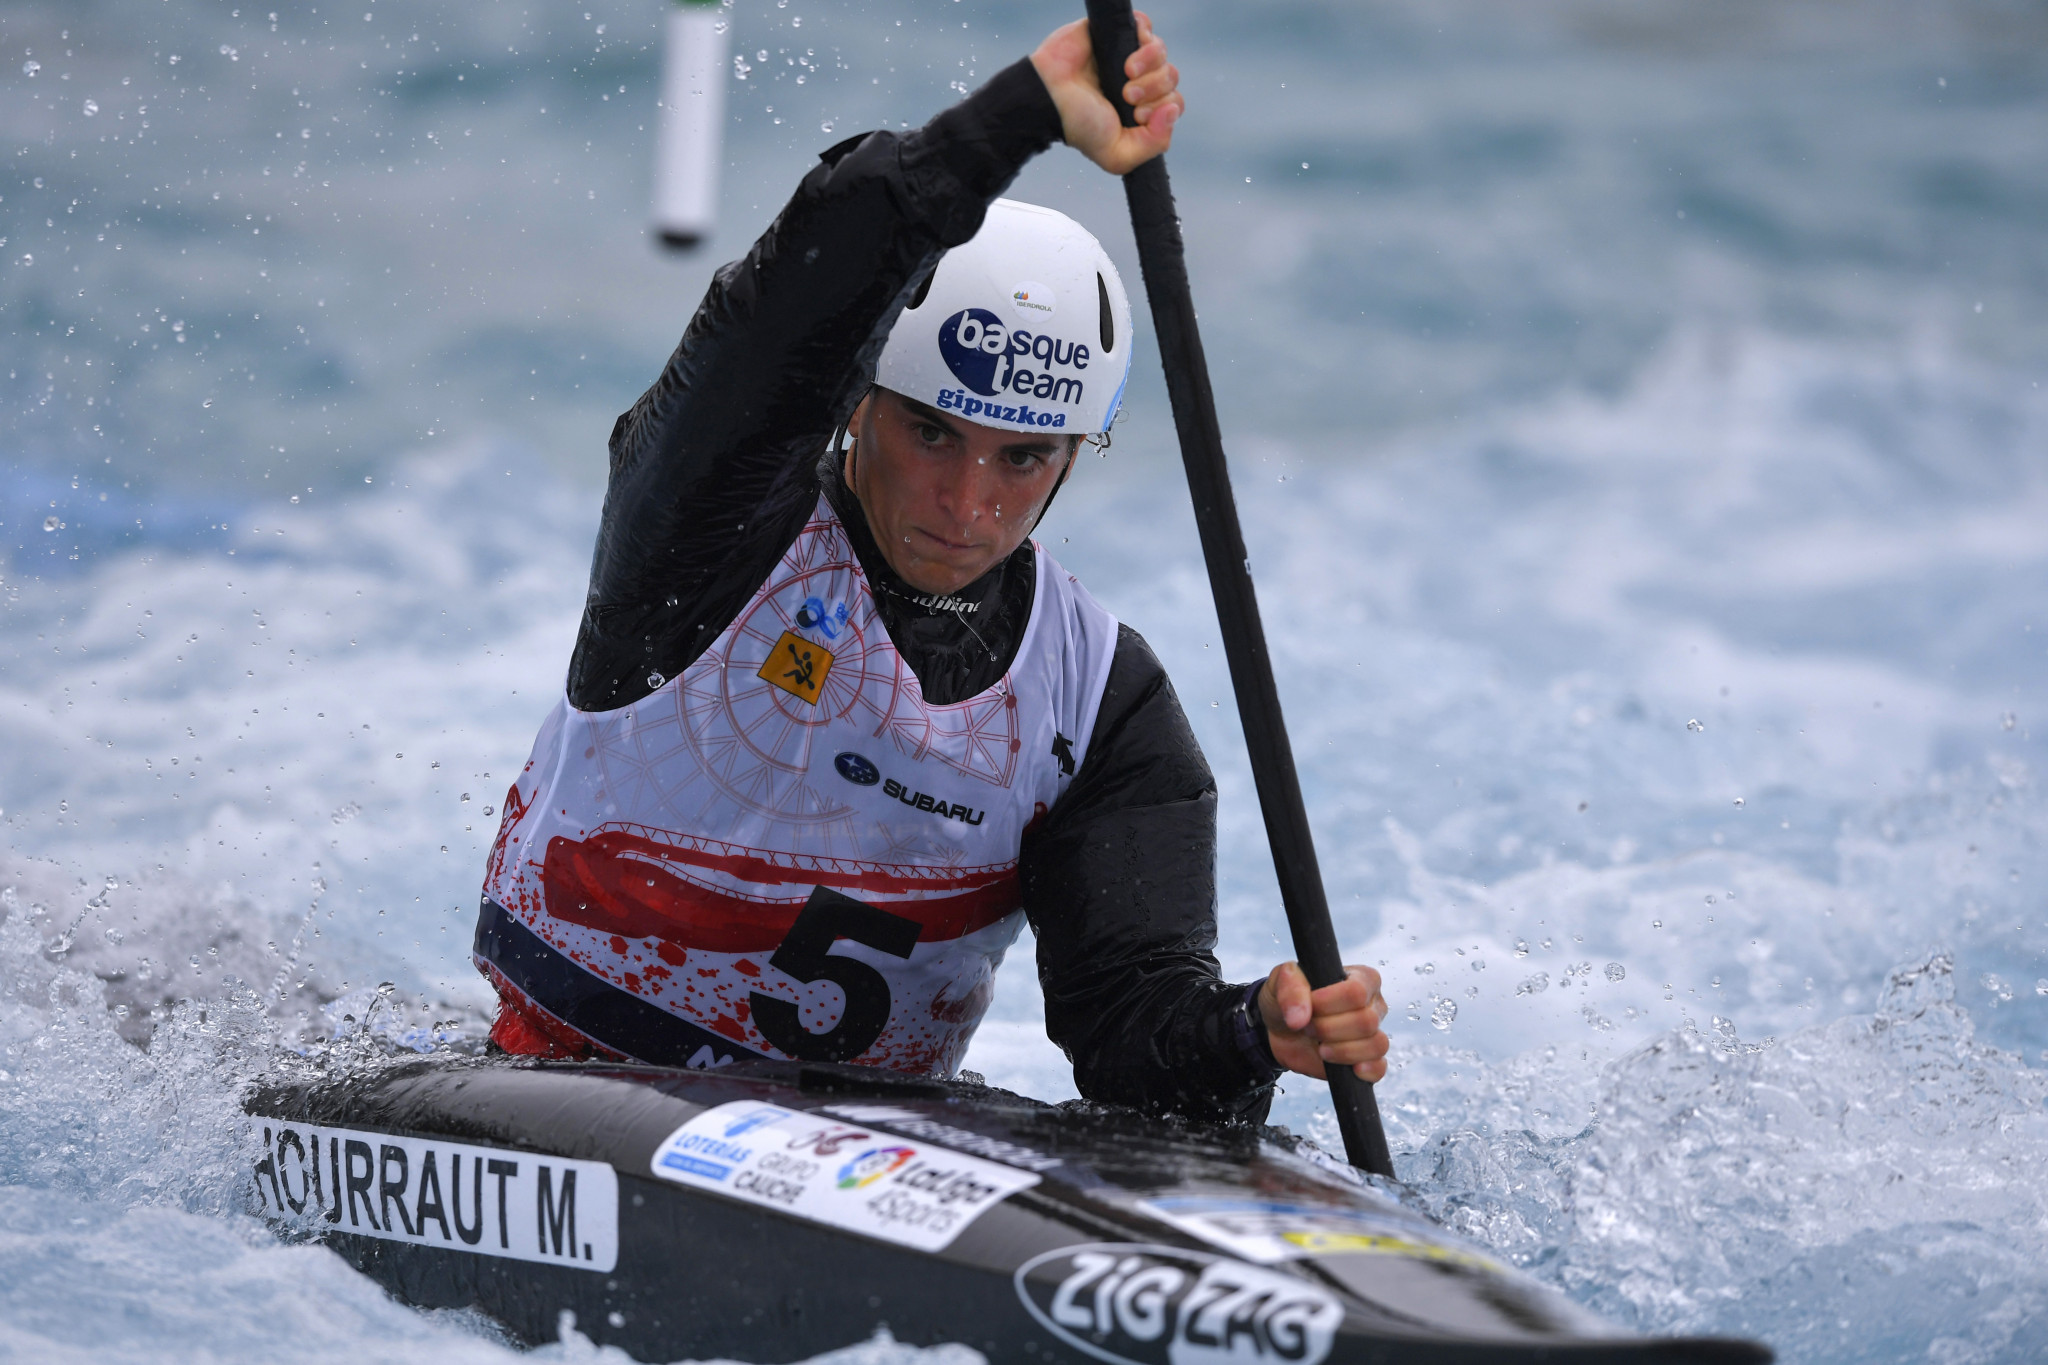 Olympic champions to feature at ICF Canoe Slalom World Cup in Pau